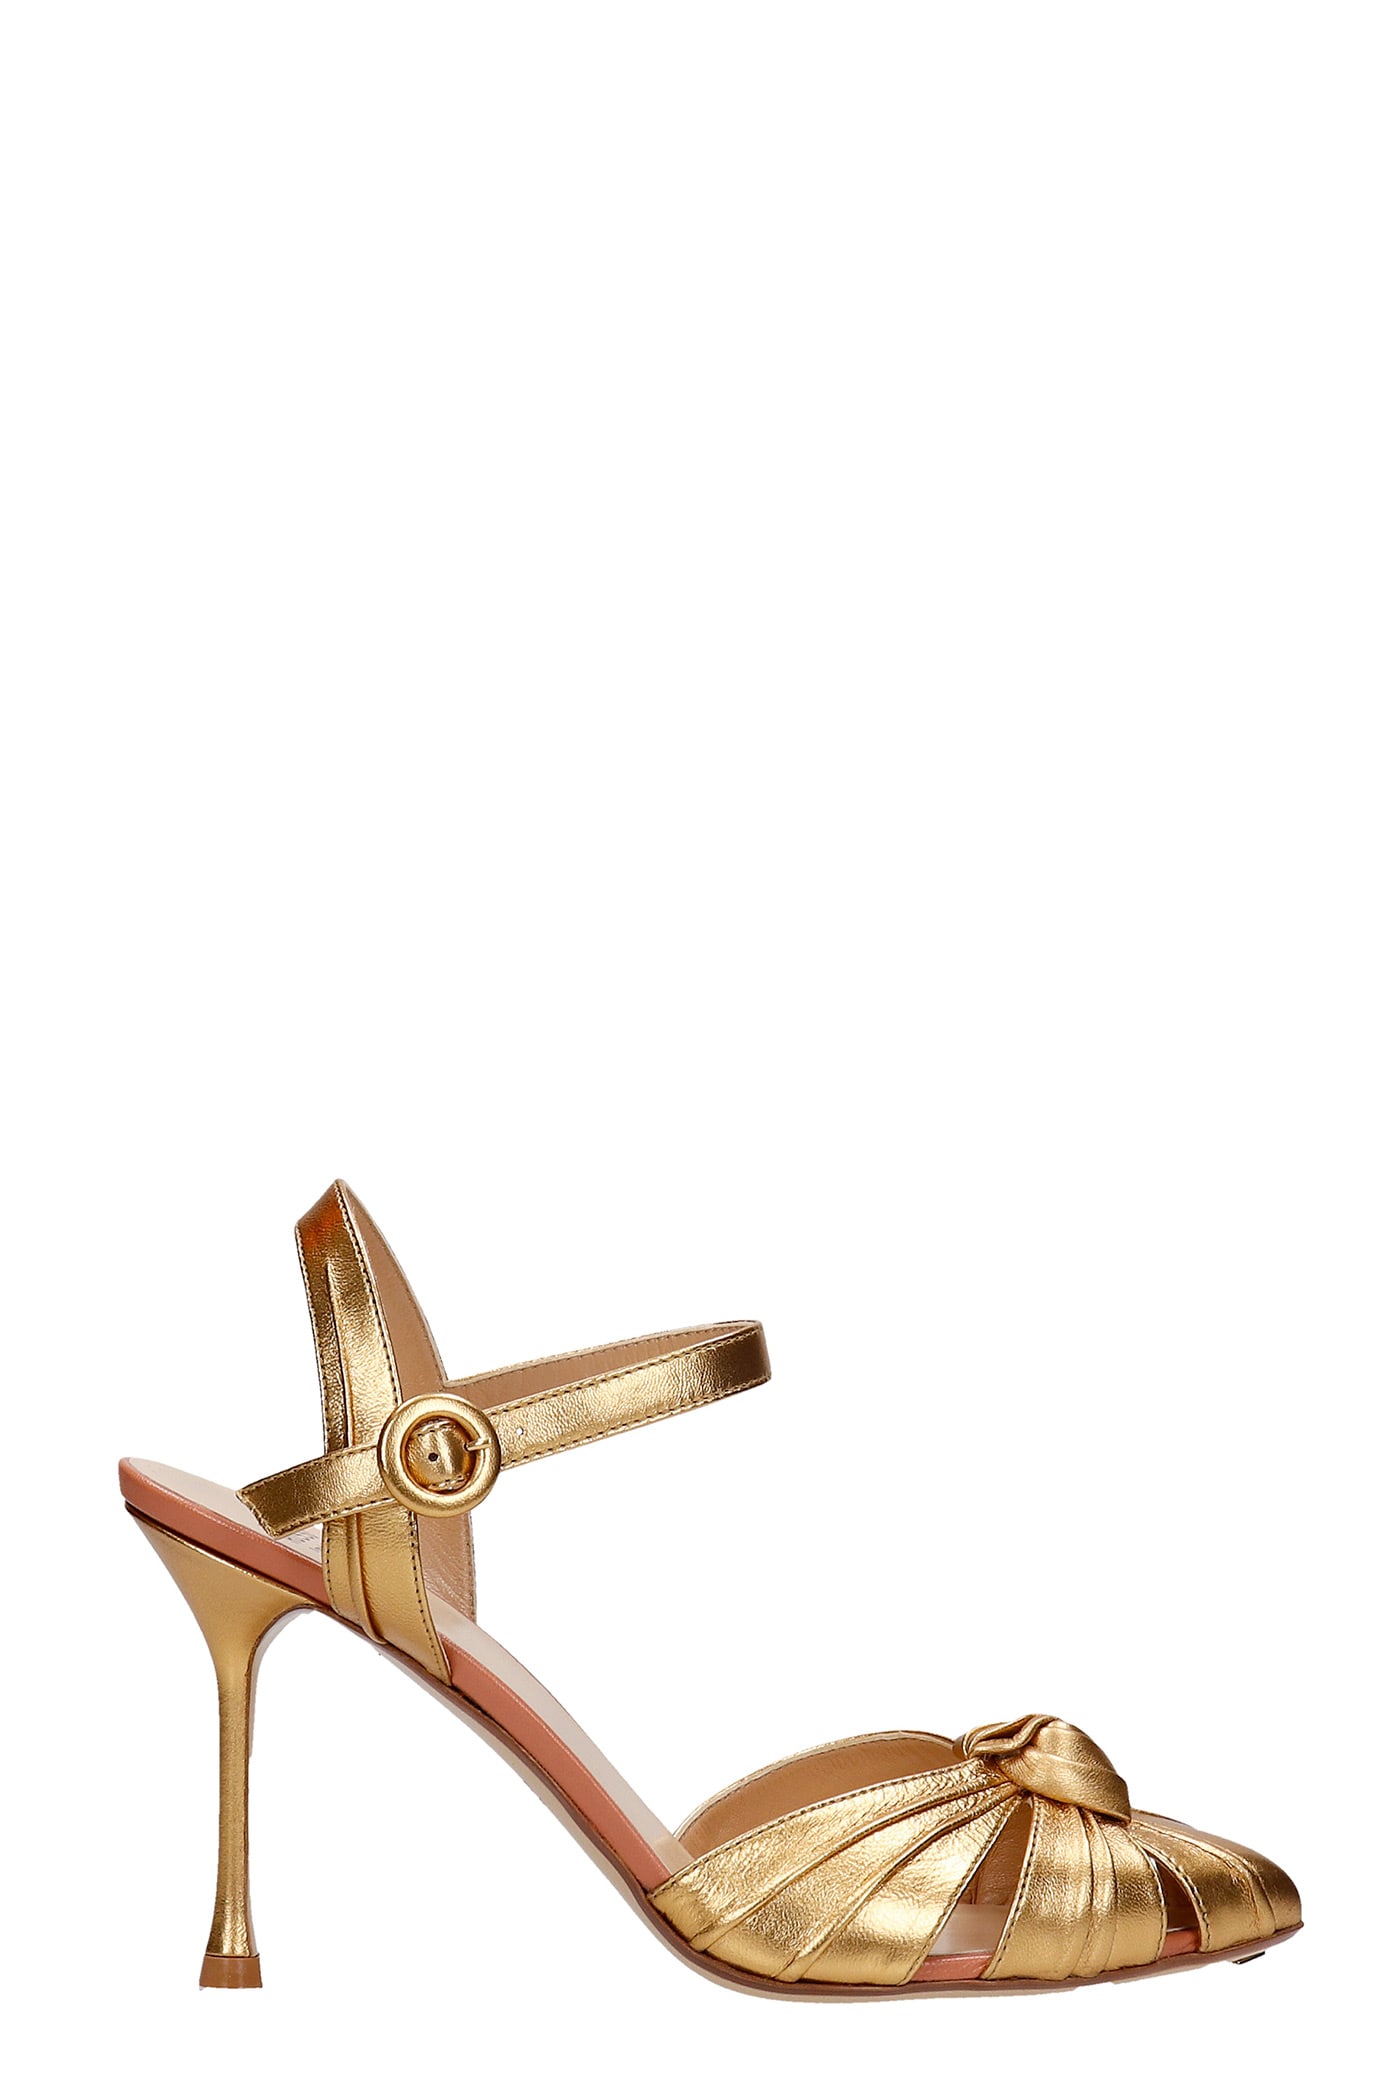 Francesco Russo Sandals In Gold Leather